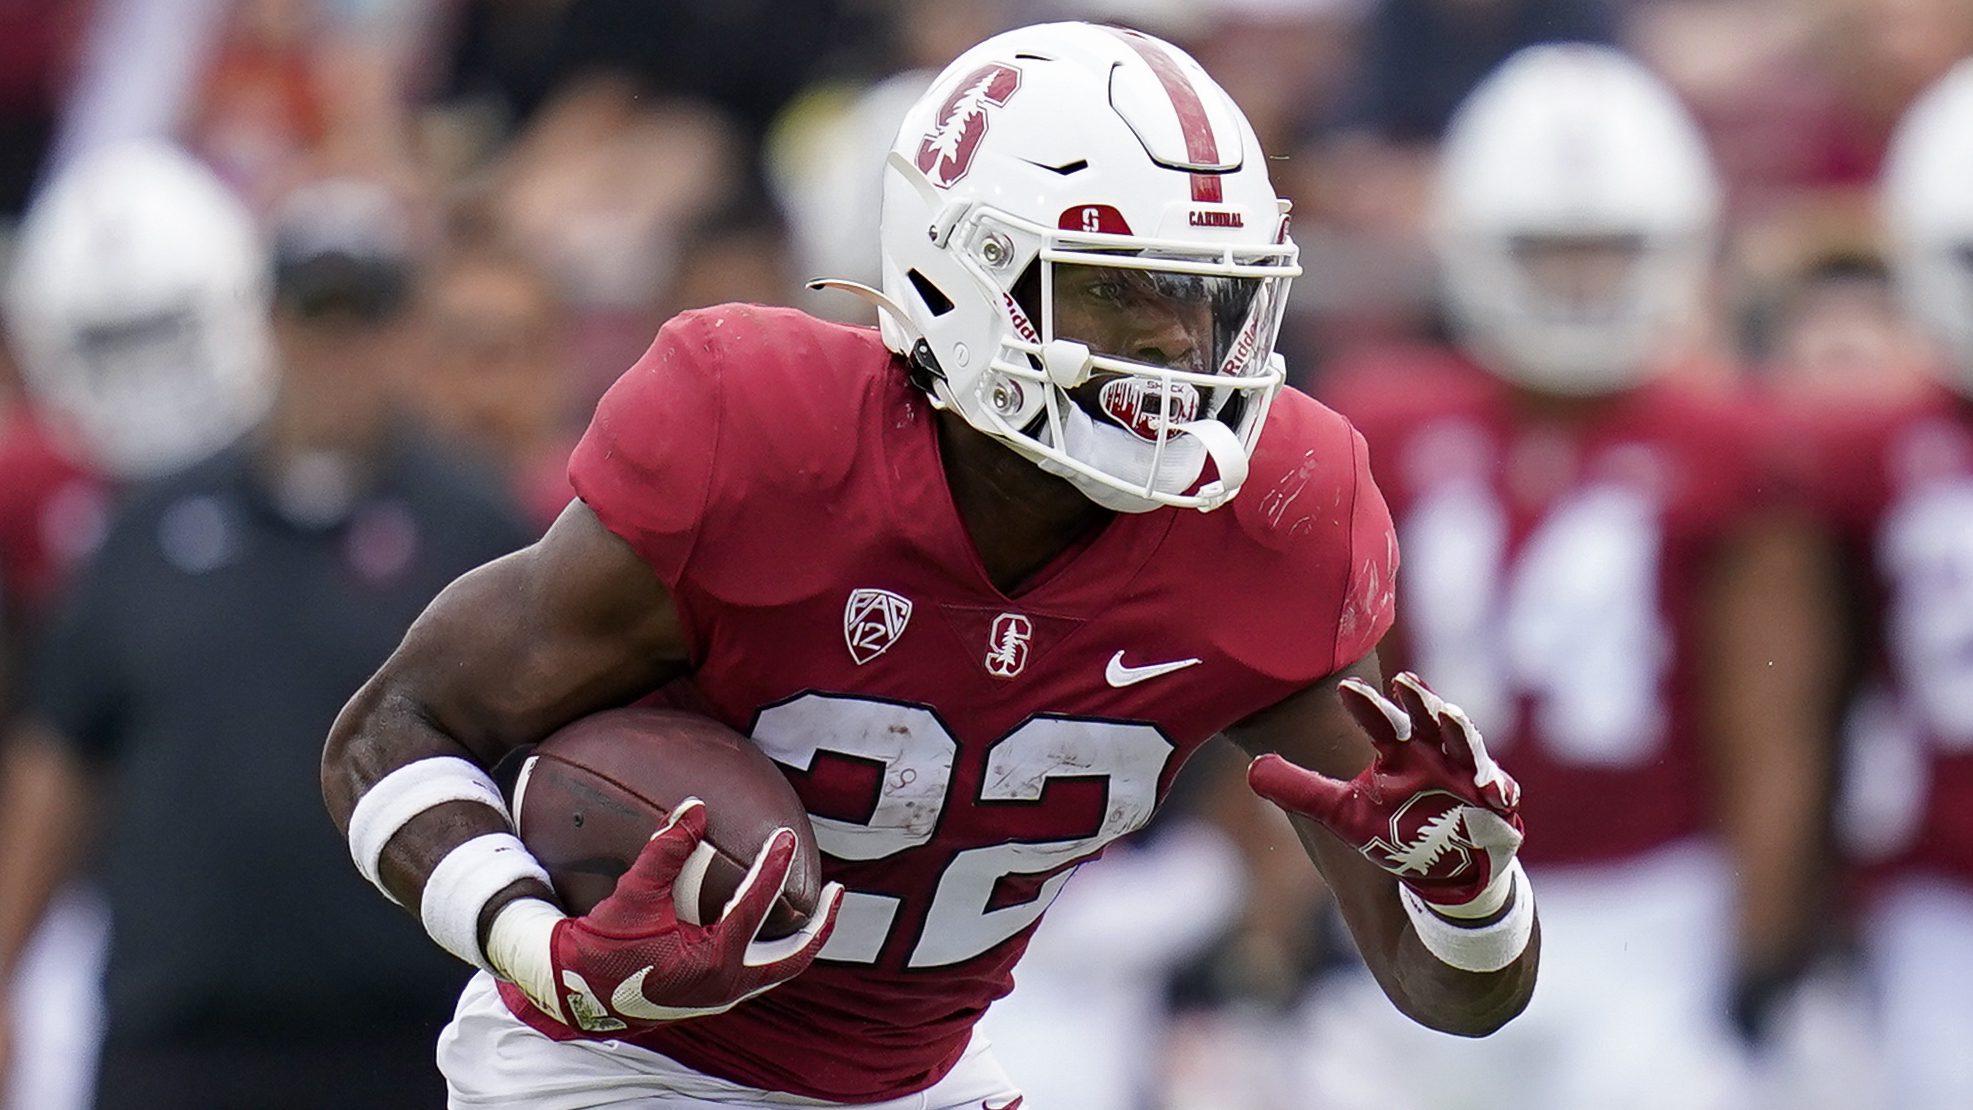 <p>Stanford running back E.J. Smith (22) runs the ball against Southern California during the first half of an NCAA college football game in Stanford, Calif., Saturday, Sept. 10, 2022. (AP Photo/Godofredo A. Vásquez)</p>
